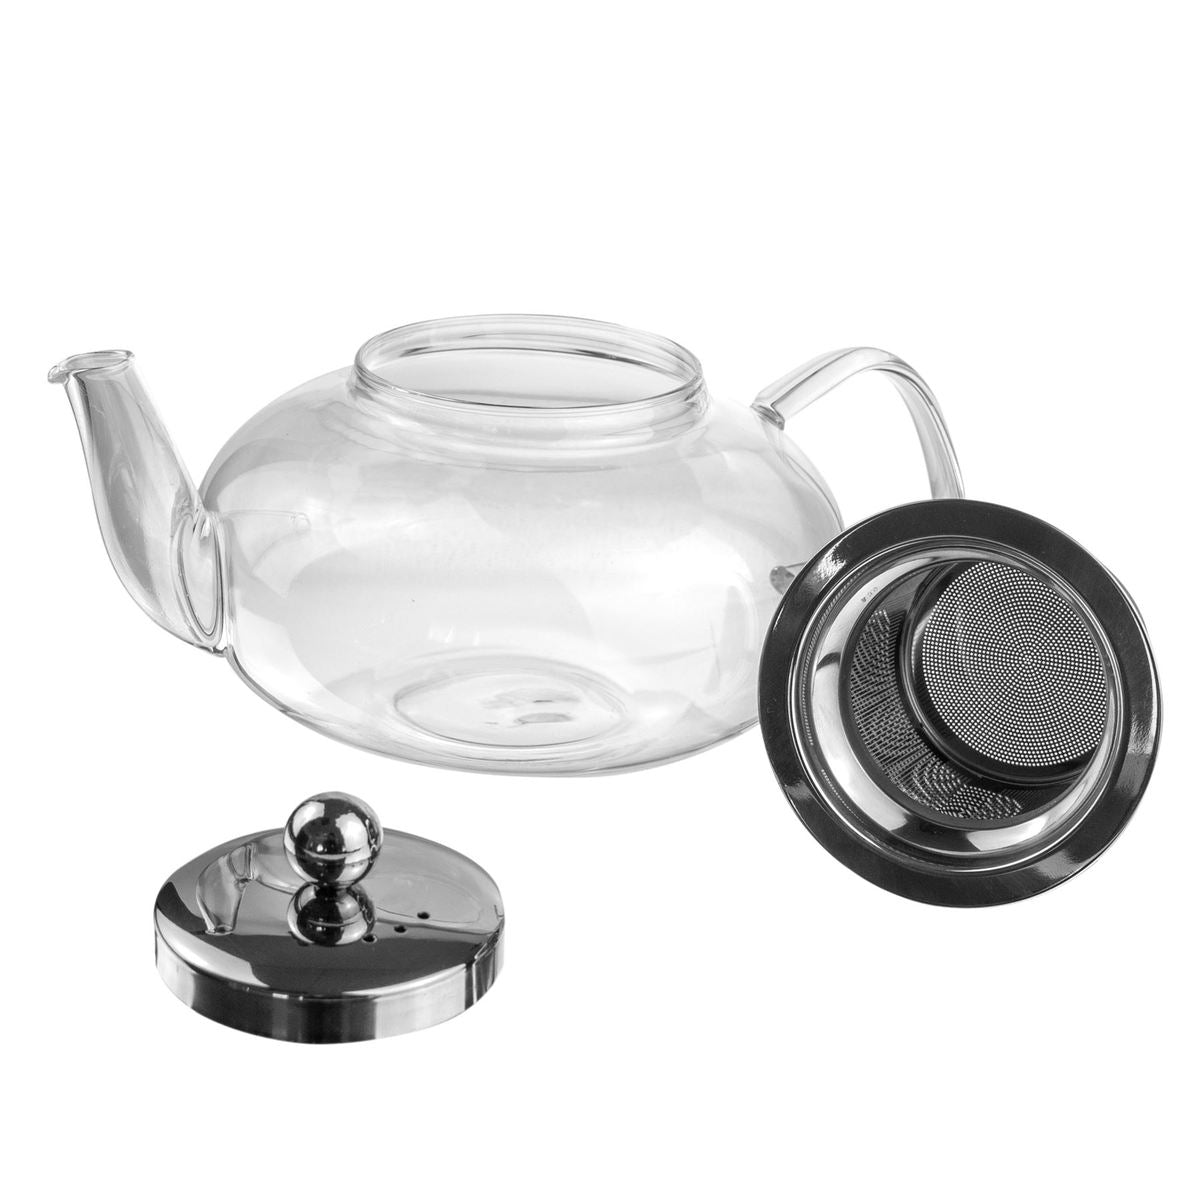 Glass Oval Teapot & Stainless Steel Infuser